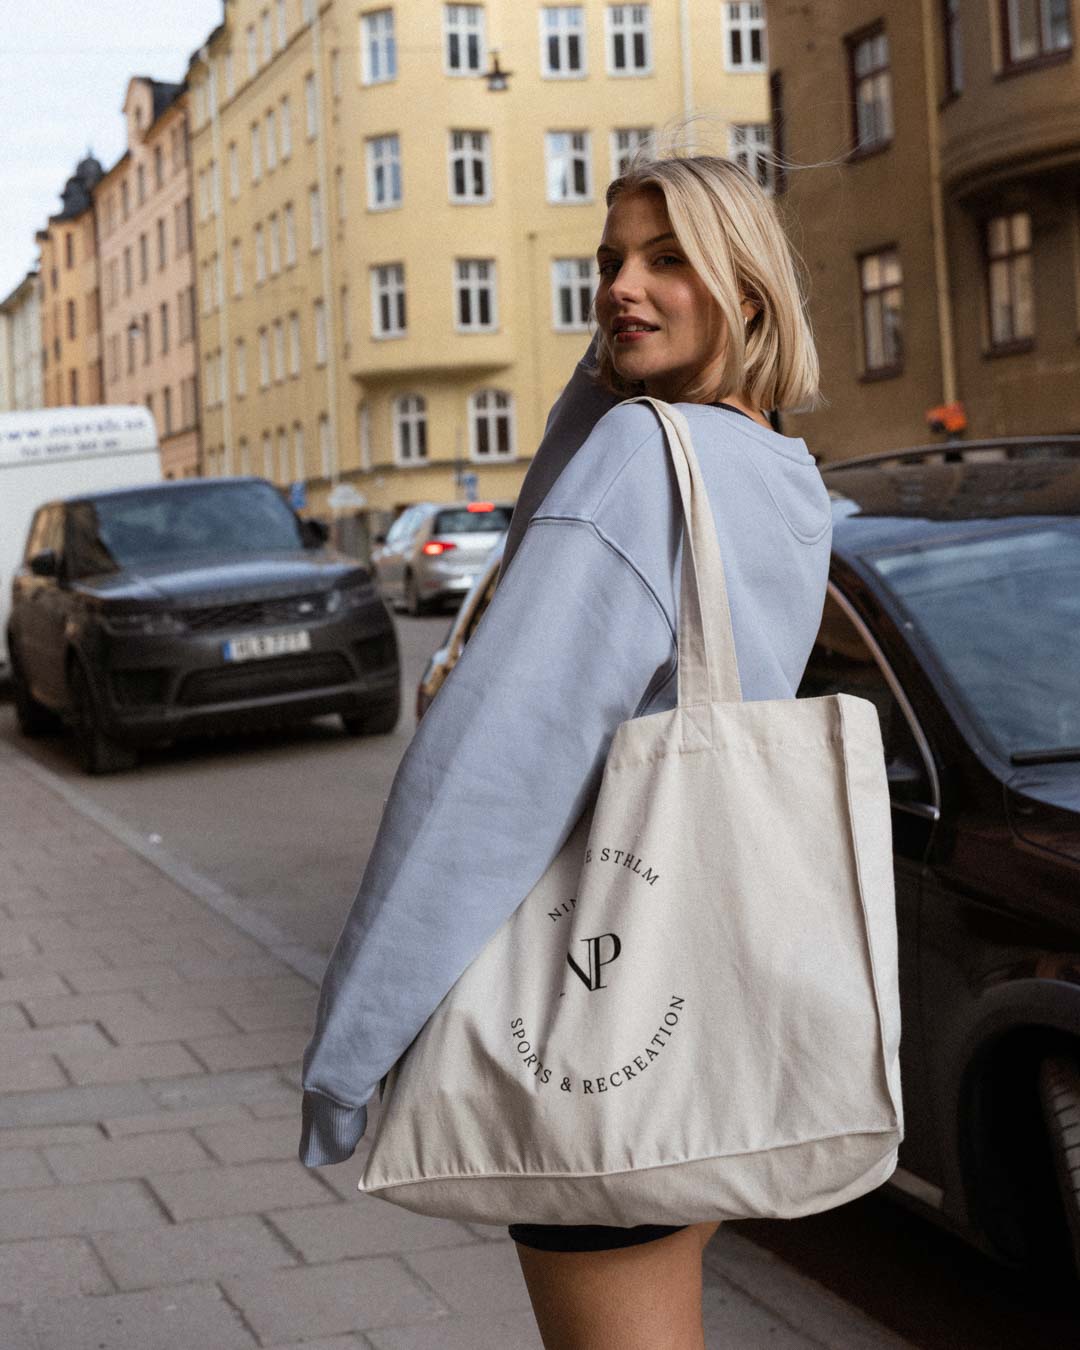 Blonde woman in biker shorts, blue sweater and a tote bag walking down a footpath in Stockholm